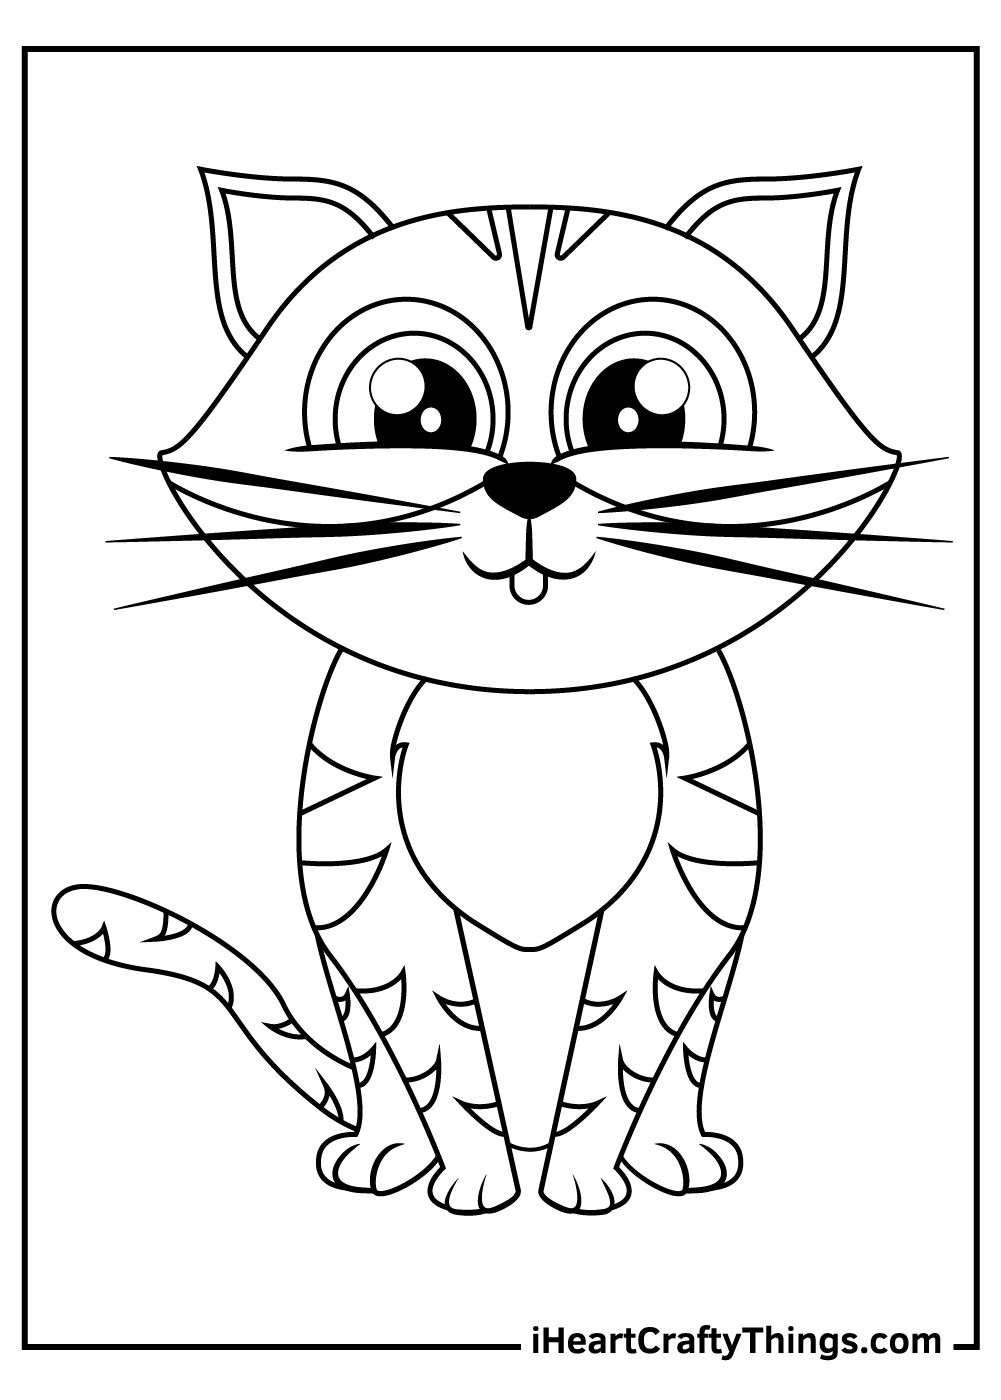 really cute kitten coloring pages to print